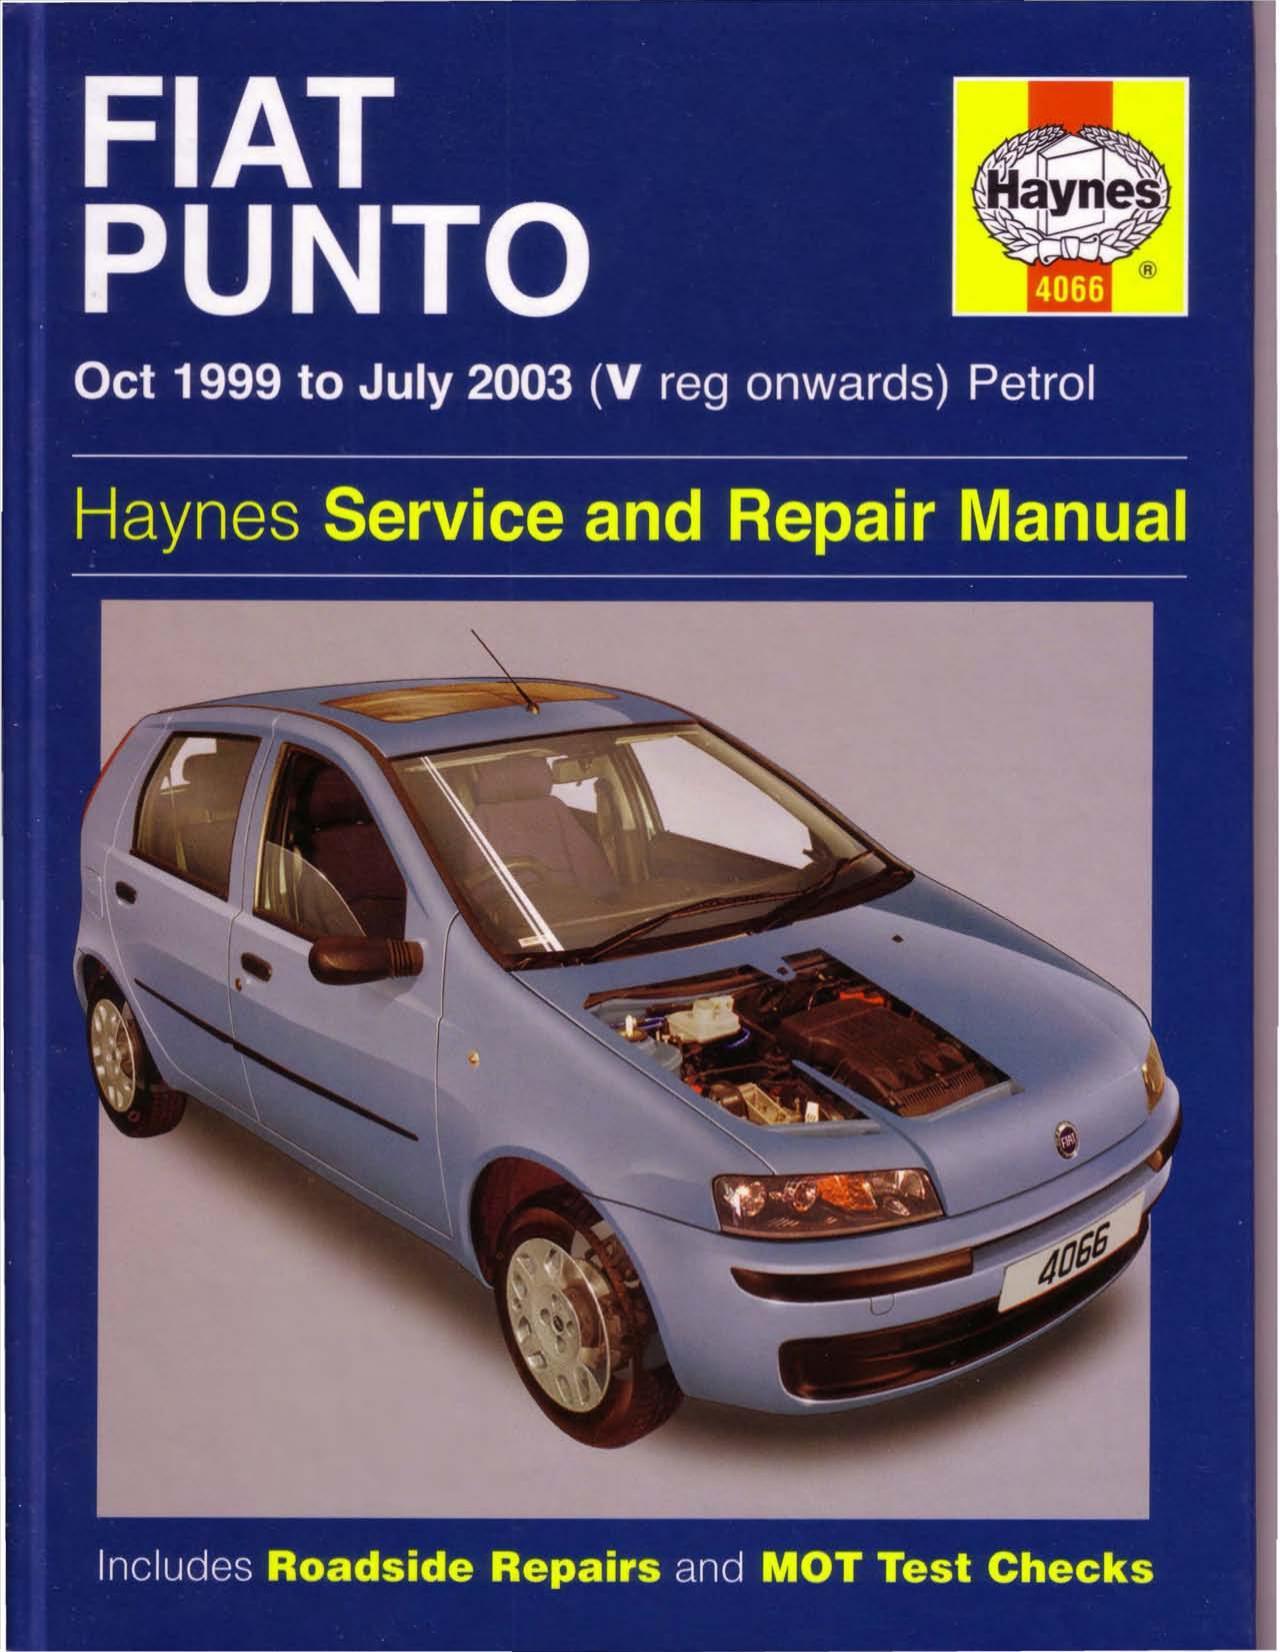 fiat-punto-service-and-repair-manual-oct-1999-to-july-2003.pdf